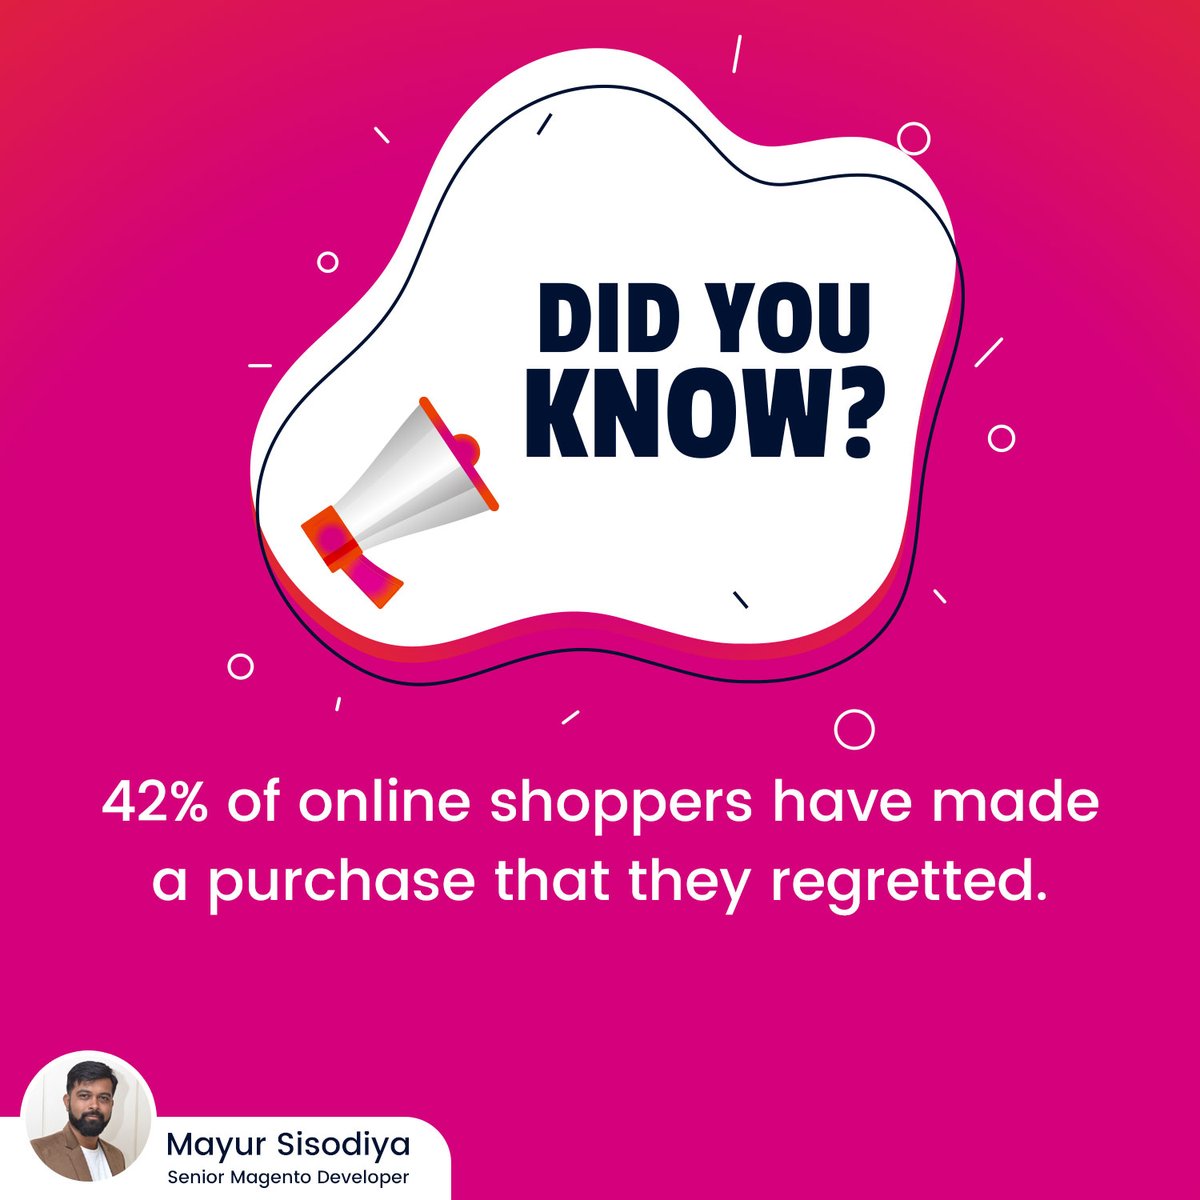 DID YOU KNOW ❓

42% of online shoppers have made a purchase that they regretted.

#didyouknow #didyouknowfacts #ecommercefacts #researchstudy #factsdaily #factlovers #dailyfacts #instafacts #worldfacts #realfacts #amazingfacts #coolfacts #interestingfacts #truefacts